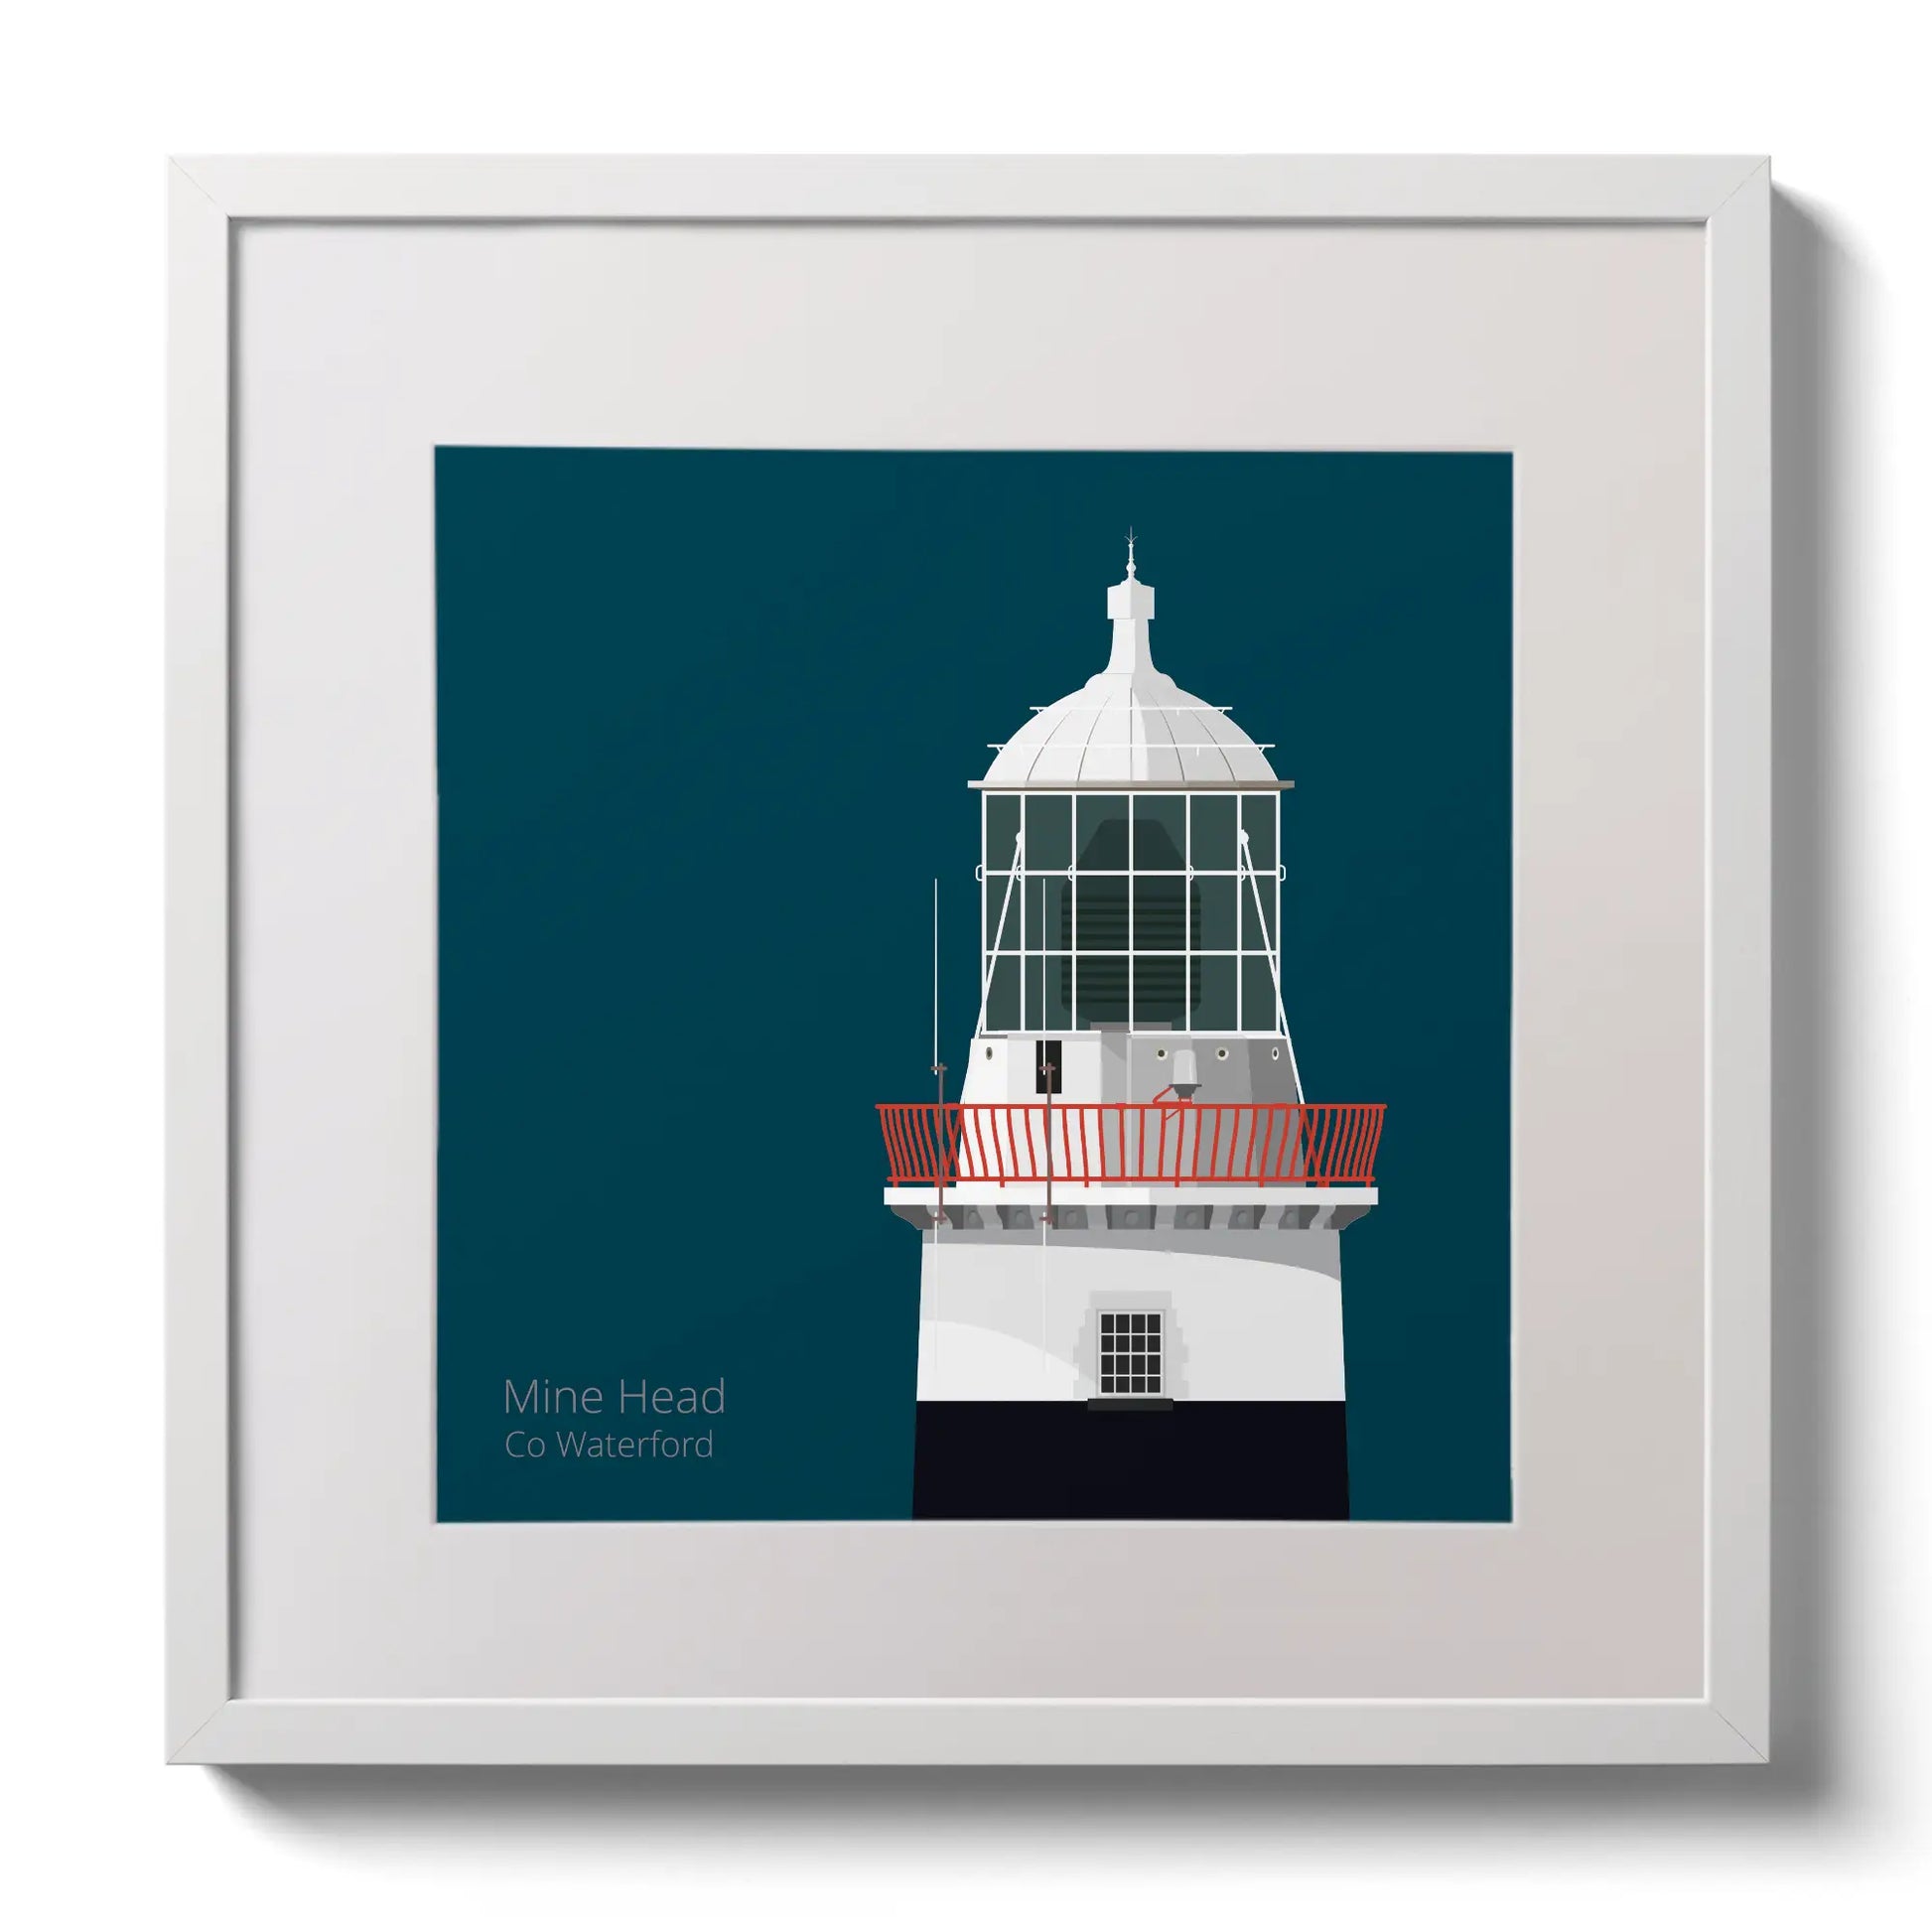 Illustration of Mine Head lighthouse on a midnight blue background,  in a white square frame measuring 30x30cm.